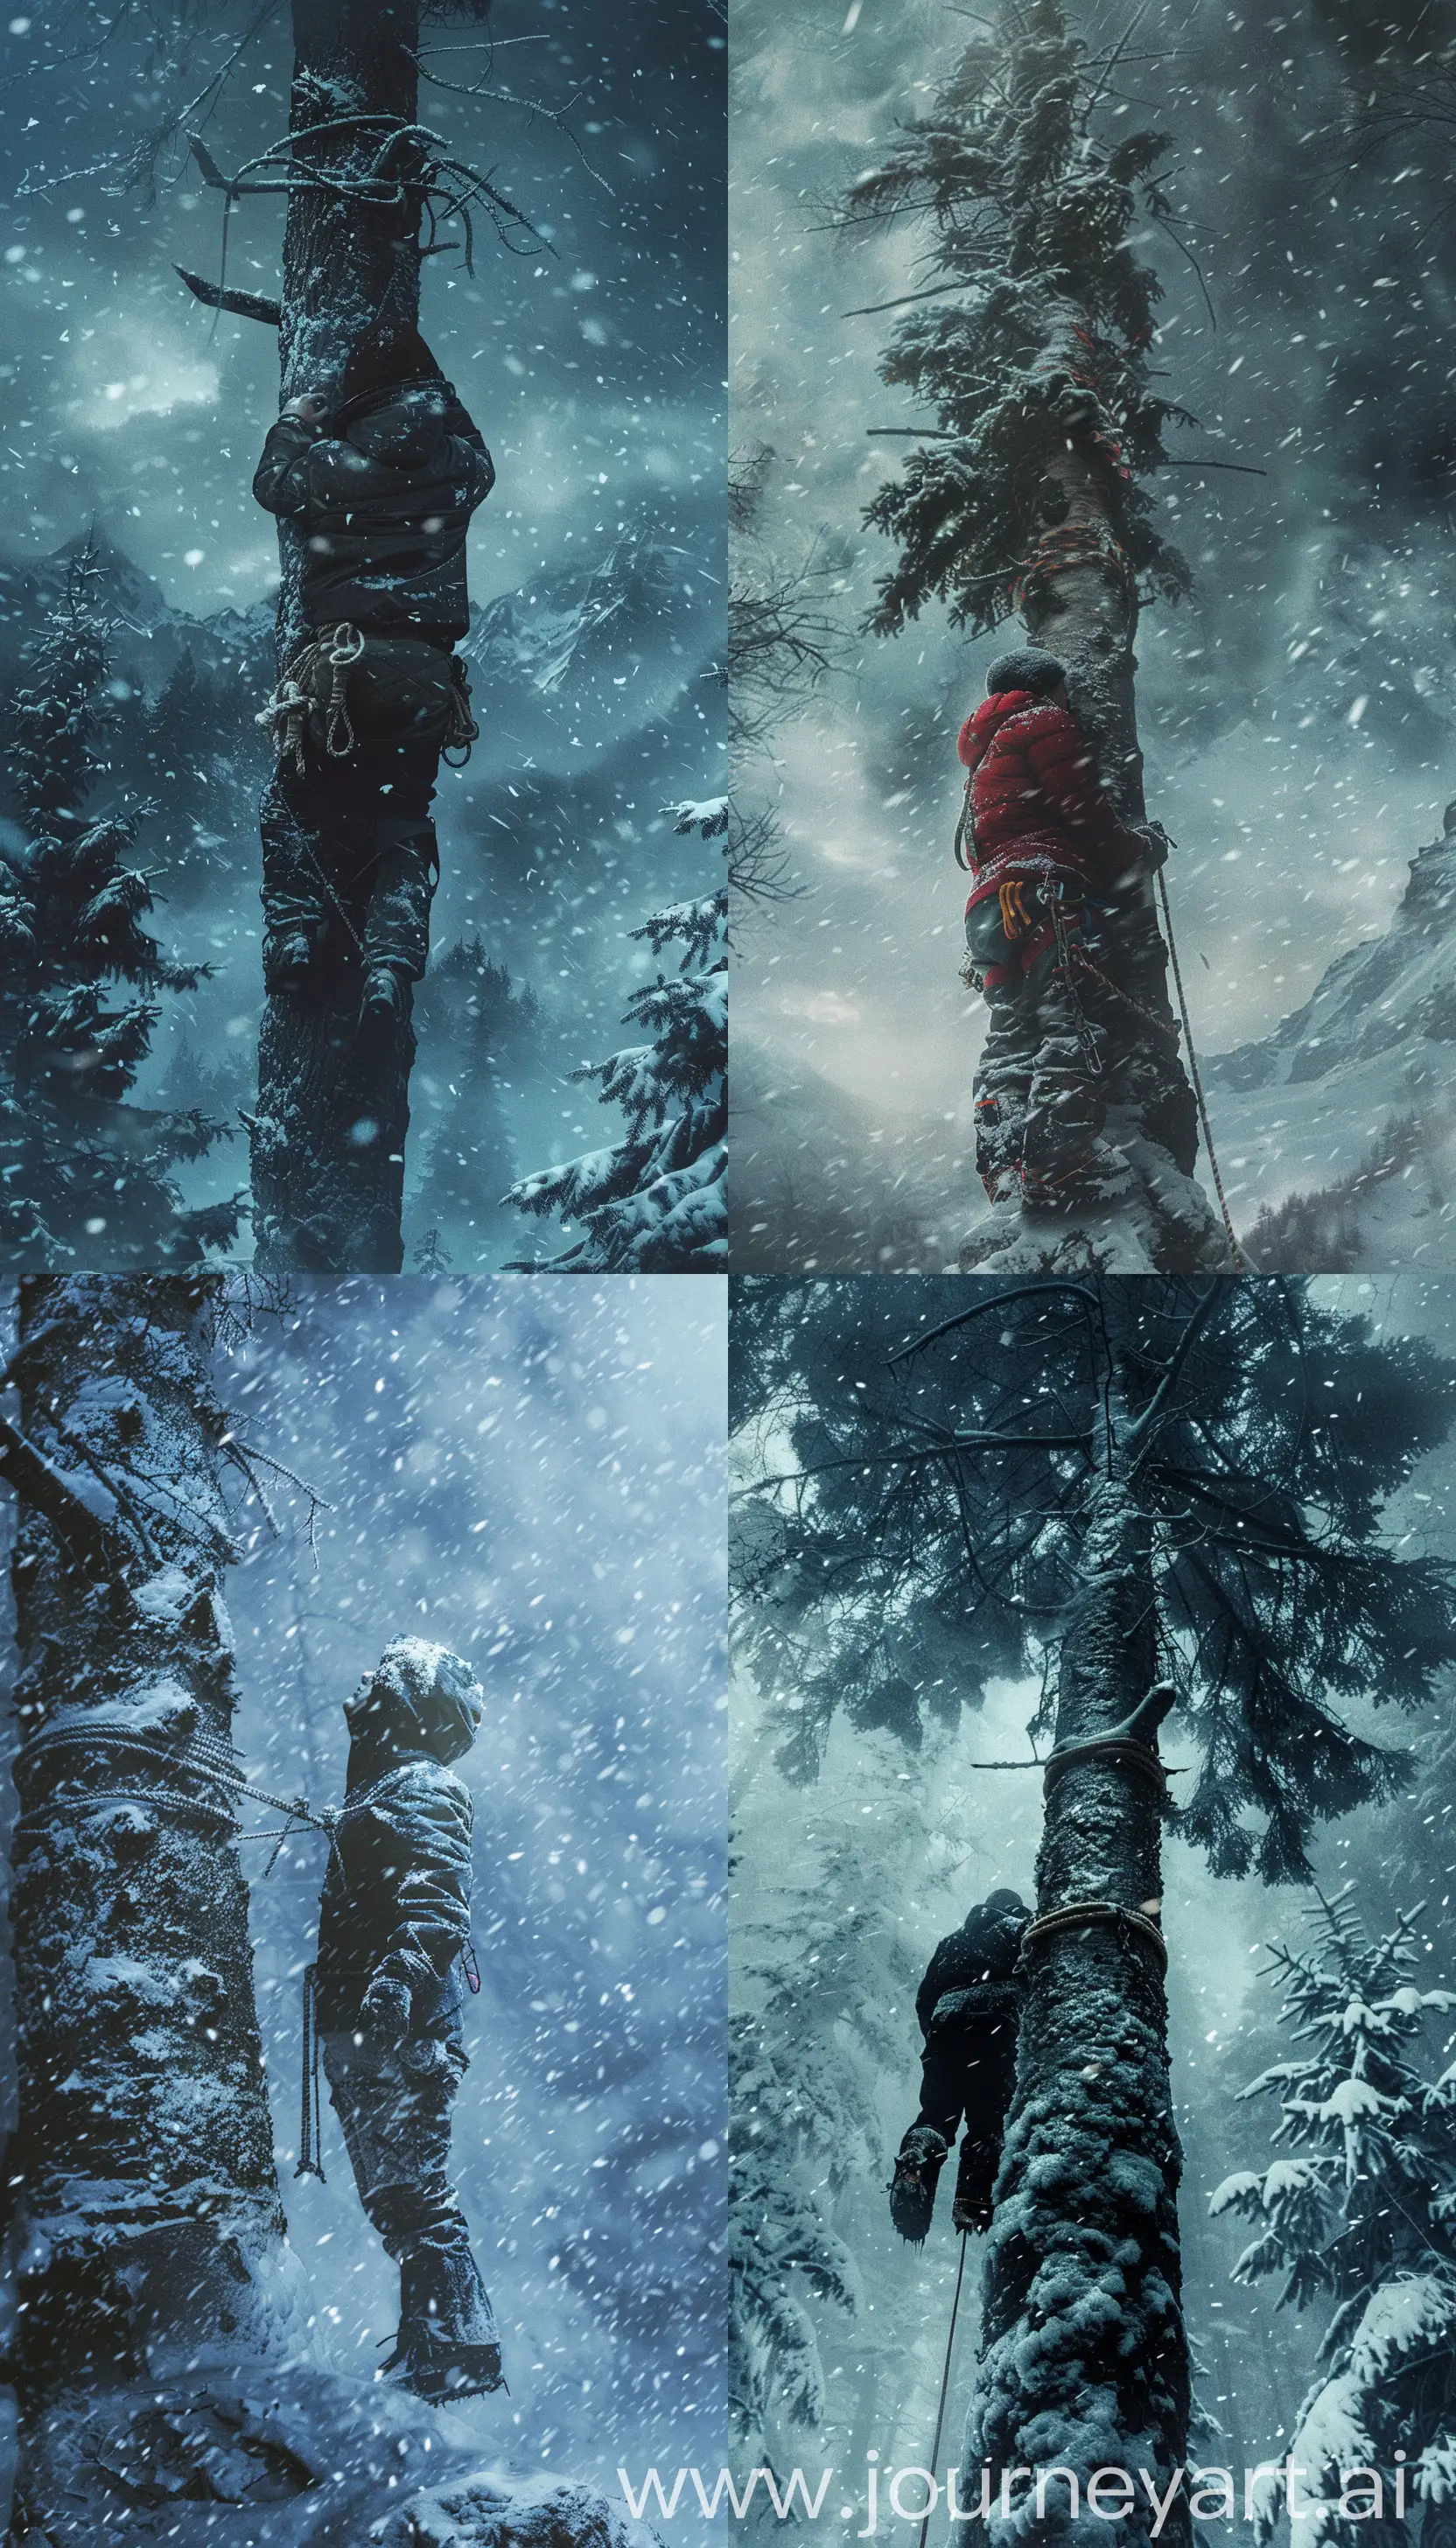 Survival-Horror-Mountaineer-Bound-to-Tree-in-Snowstorm-Forest